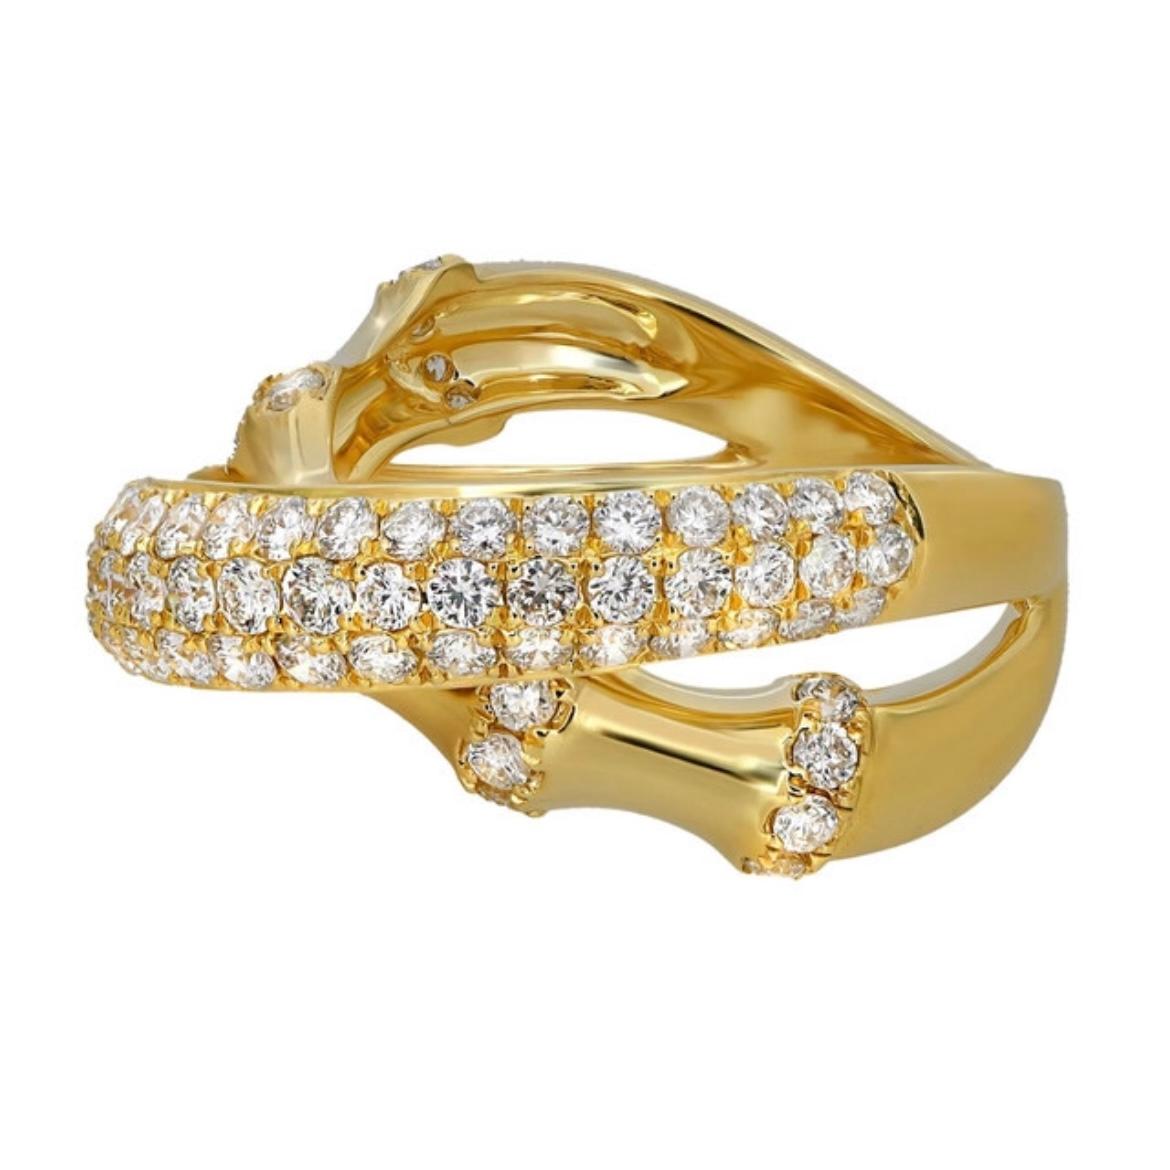 For Sale:  Elizabeth Fine Jewelry 1.71 Carat Diamond Crossover Ring in 18K Yellow Gold  2